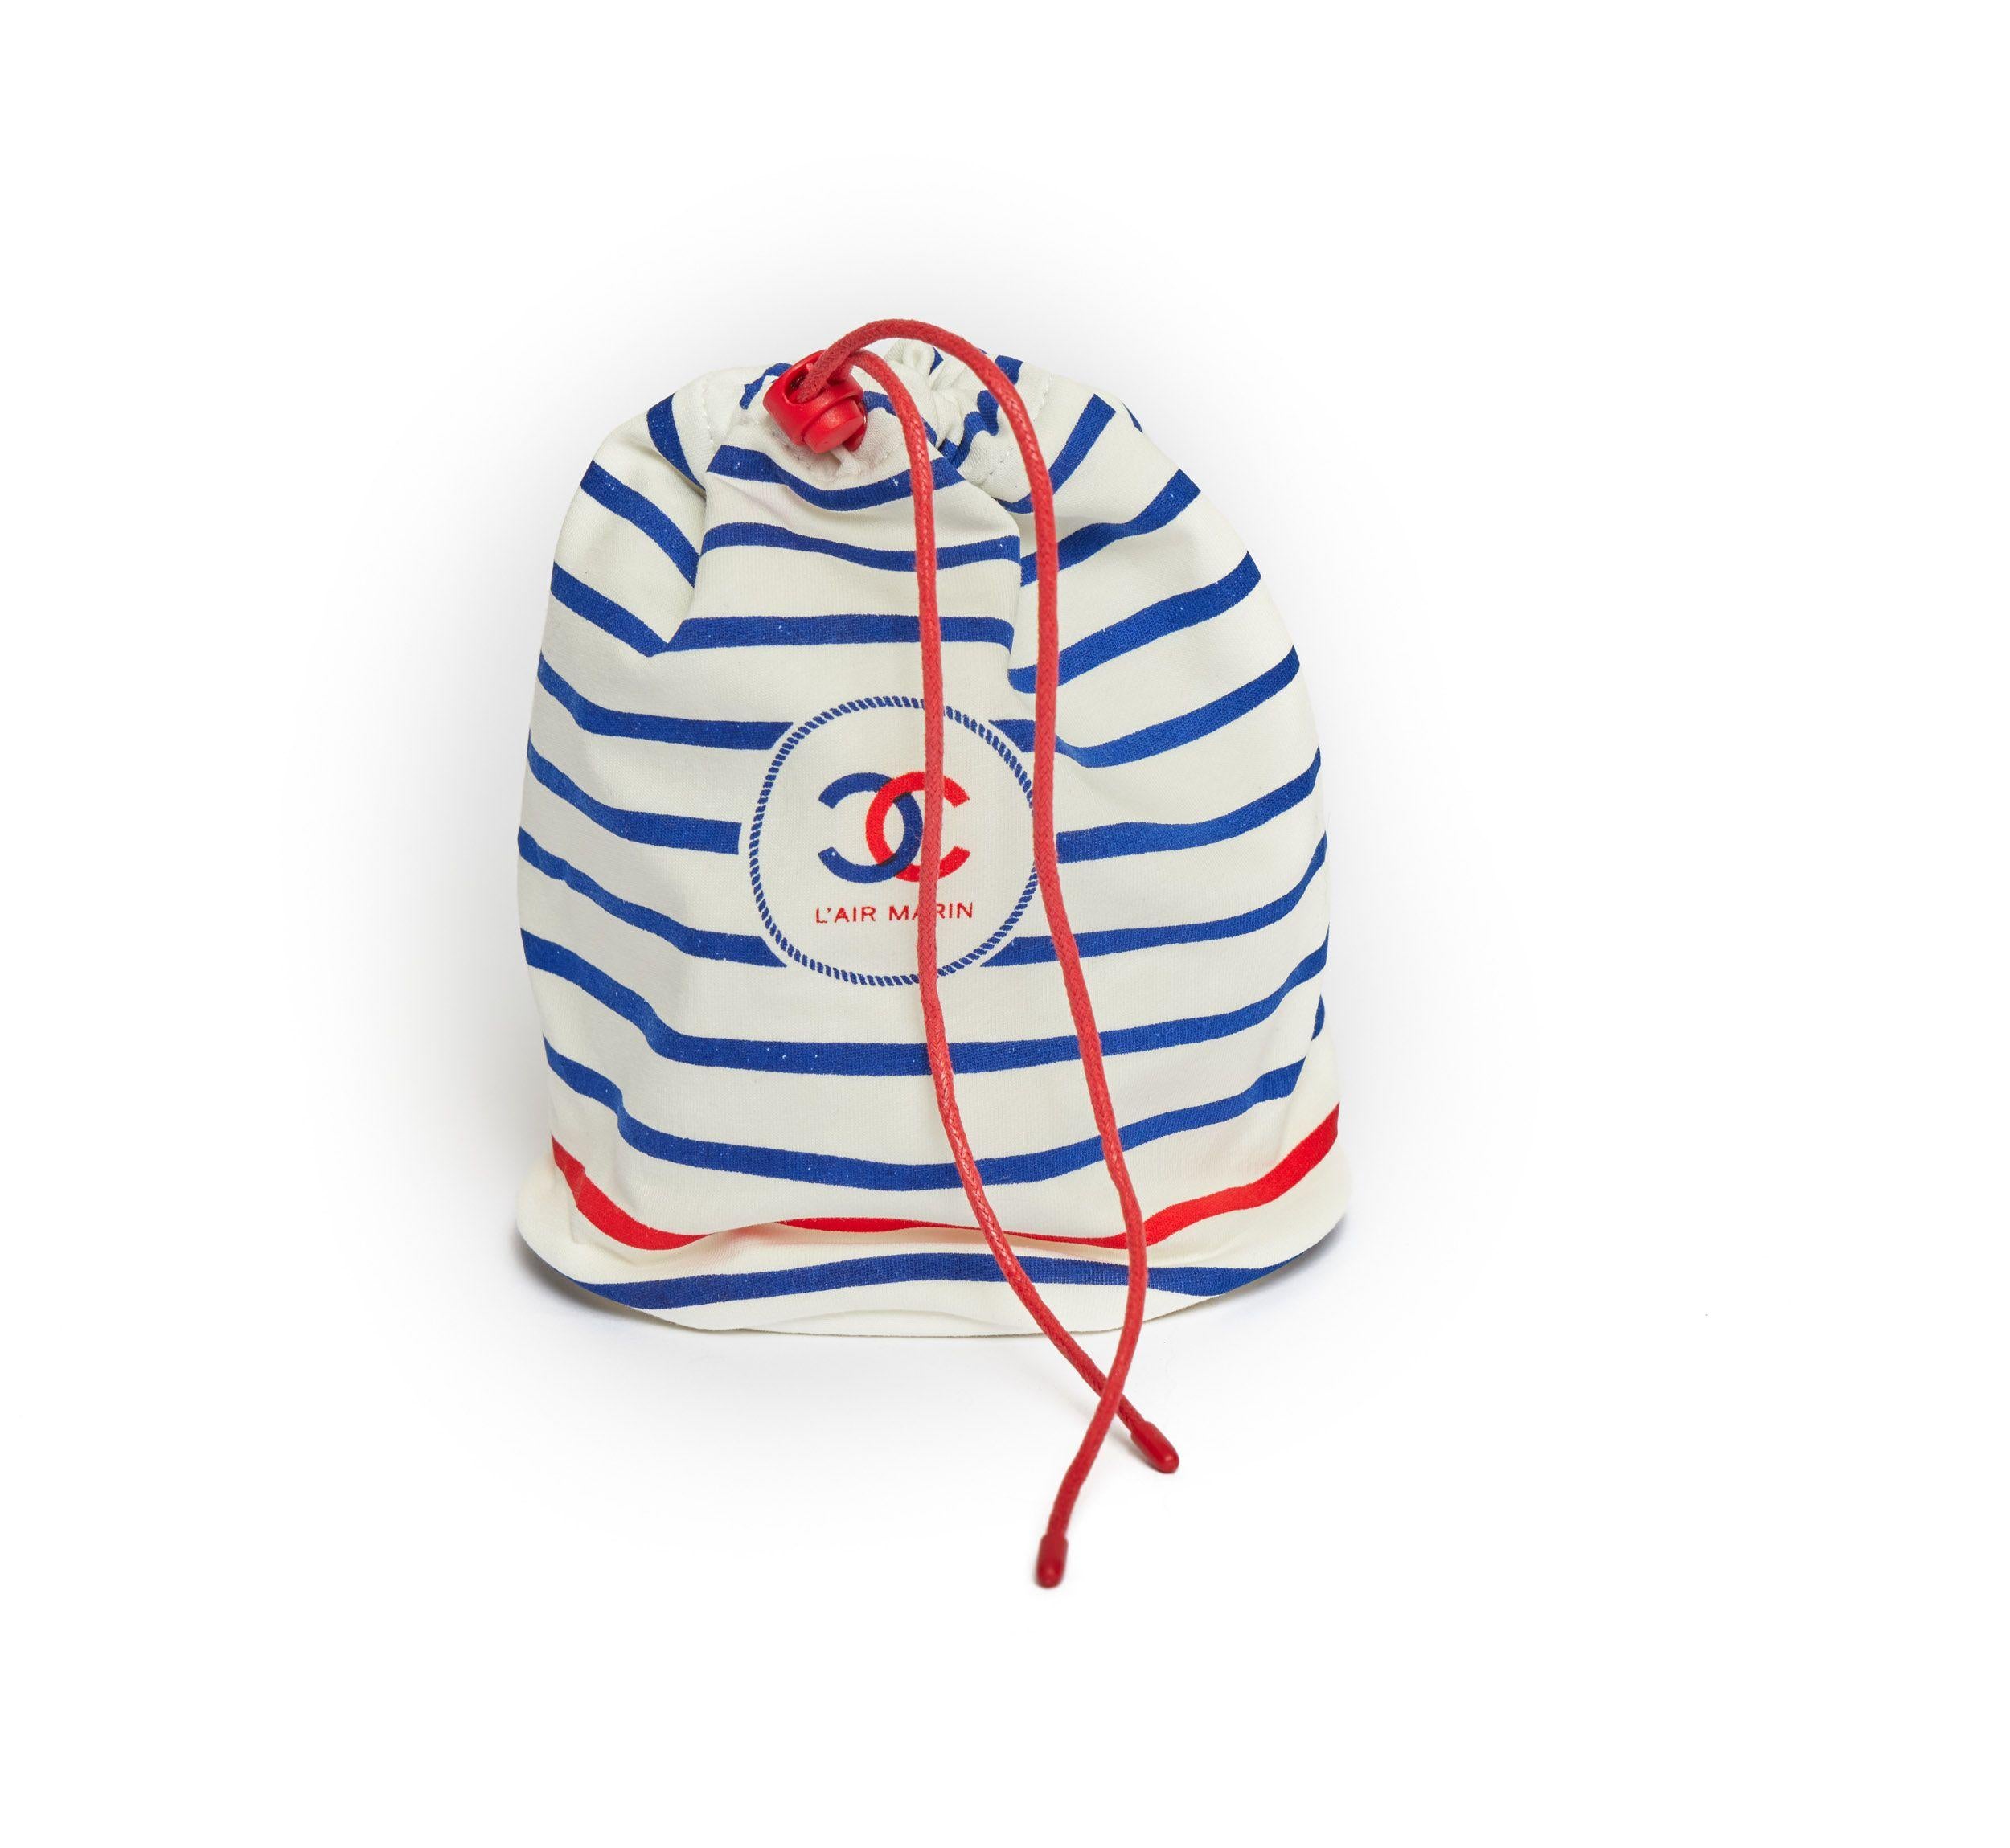 Chanel Beauty Case from the L'Air Marin collection. This item were never for sale and only for VIP clients. It has never been used. The bag is made out of cotton and spandex. It is in a maritime style with blue stripes and one red stripe at the